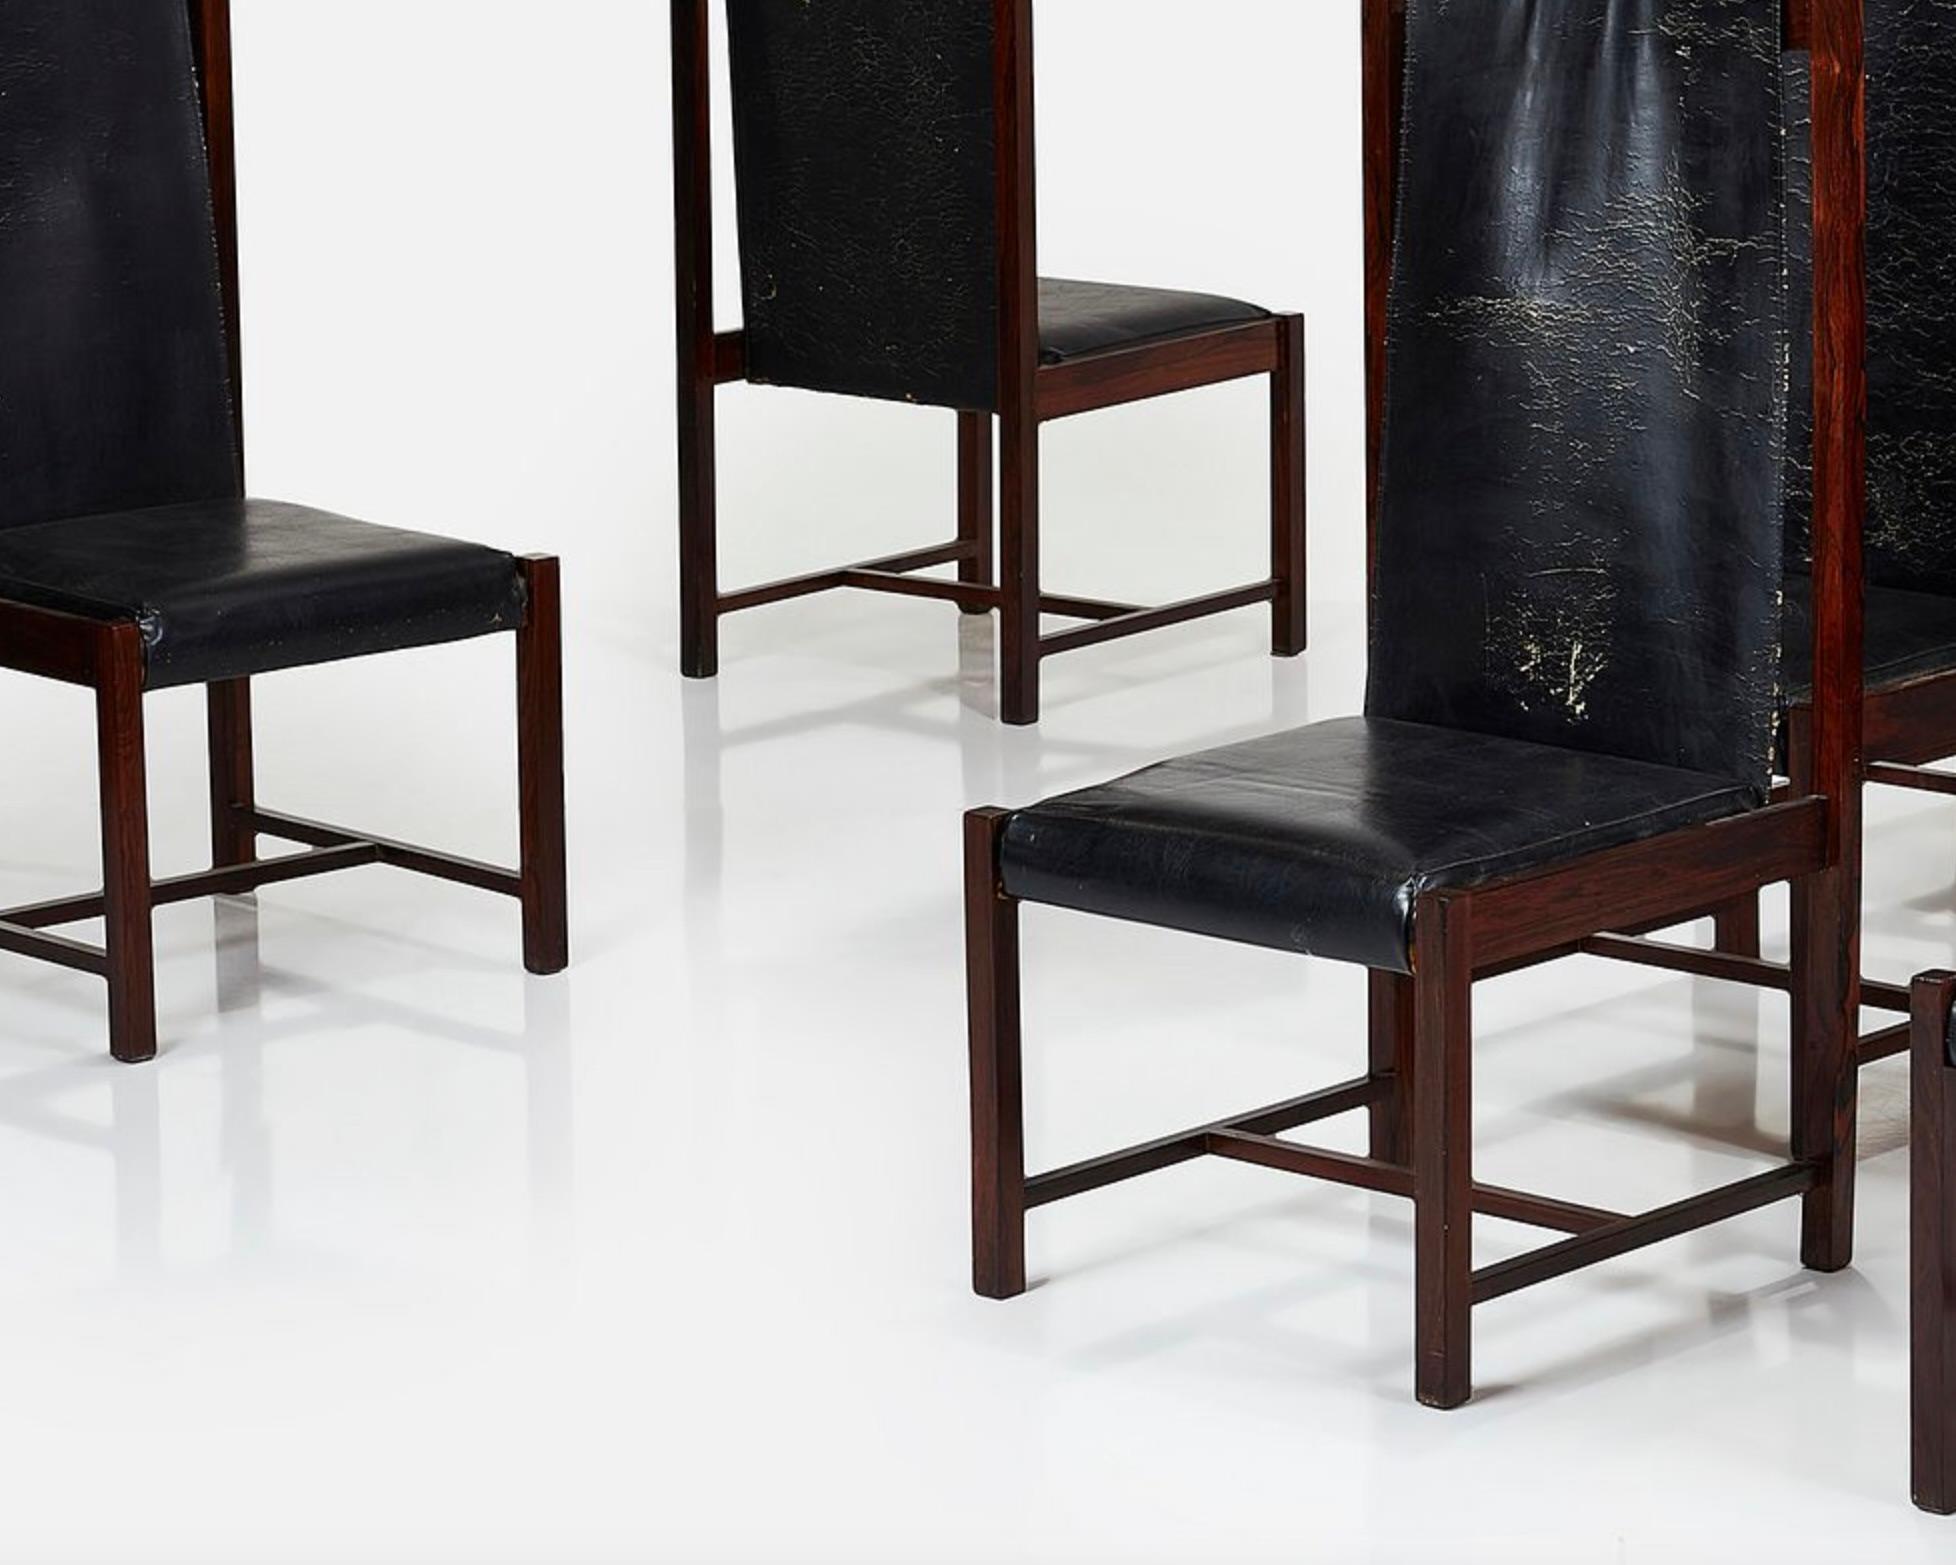 Celina Decorações High Back Dining Chairs epitomize refined elegance and luxurious comfort. Crafted with meticulous attention to detail, these chairs boast a regal stature with their tall backs. Perfect for formal dining settings or as accent